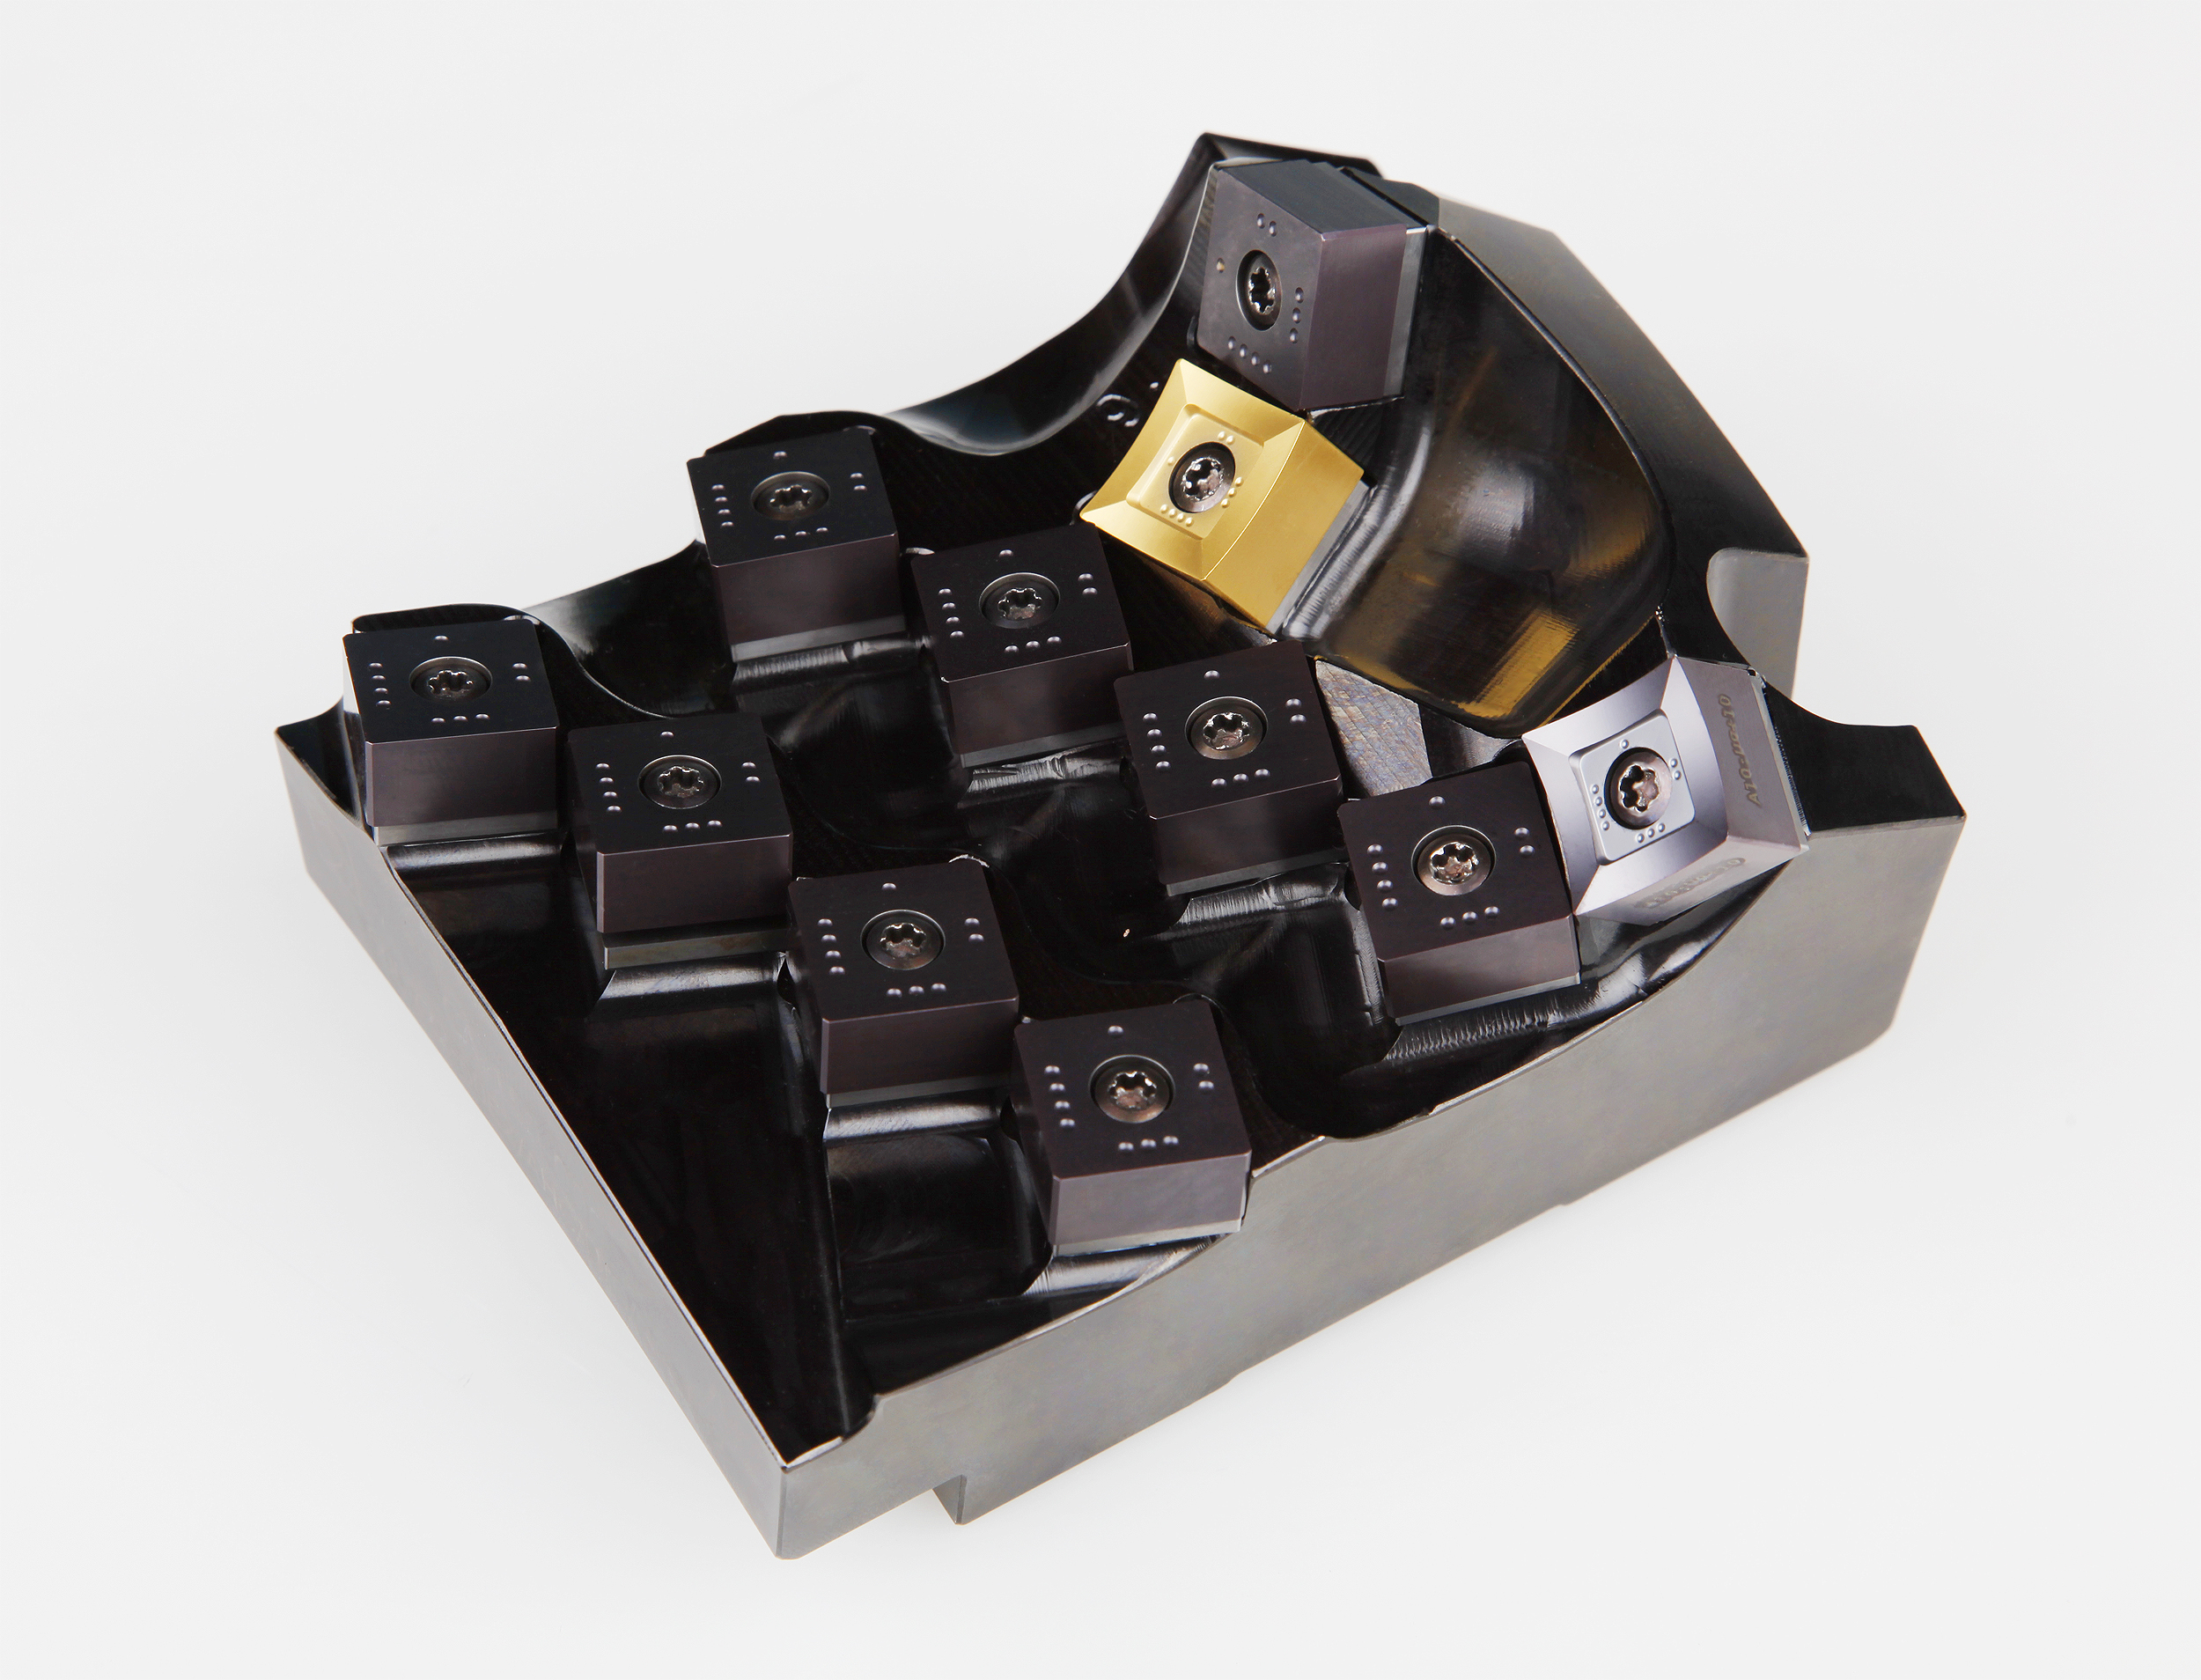 A variety of universal and removable cassetts are available for dynamic rail milling.